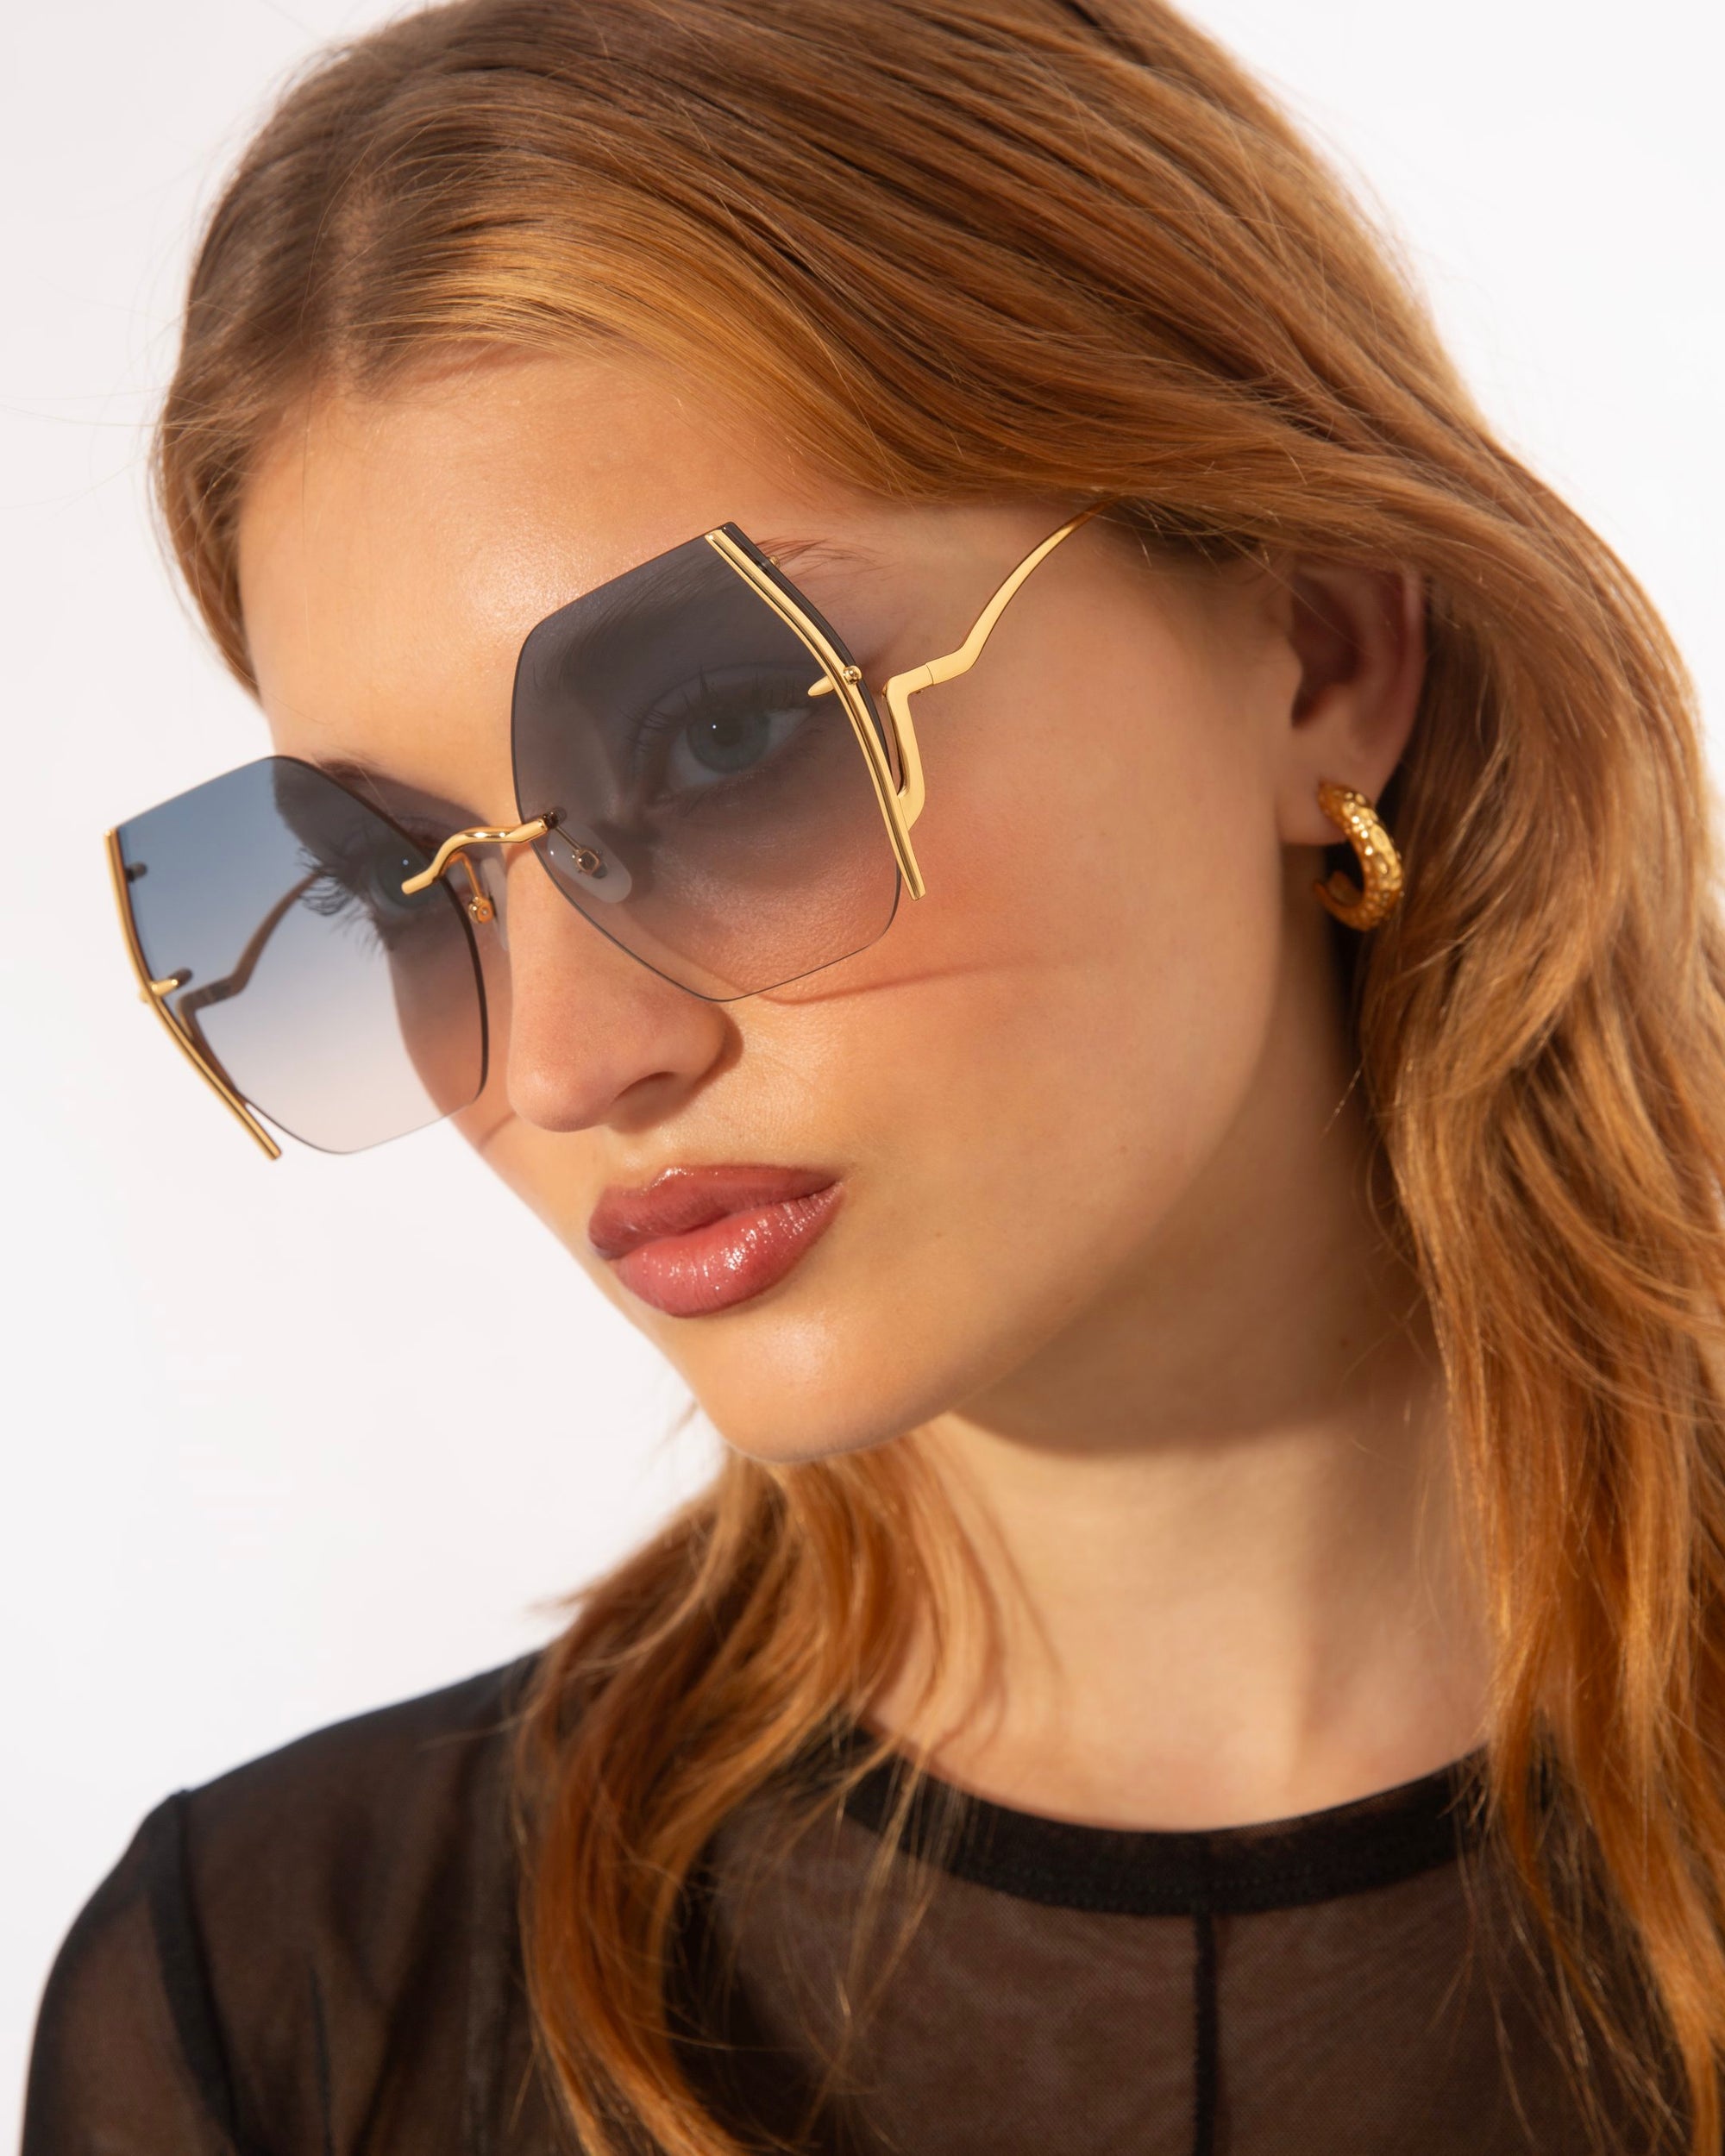 A woman with long, light brown hair wears oversized, square-shaped For Art's Sake® Generation sunglasses with a gold frame and jadestone nosepads for extra comfort. She has gold hoop earrings and is dressed in a black top. The For Art's Sake® Generation sunglasses offer UV protection, ensuring style and safety. The background is plain white.